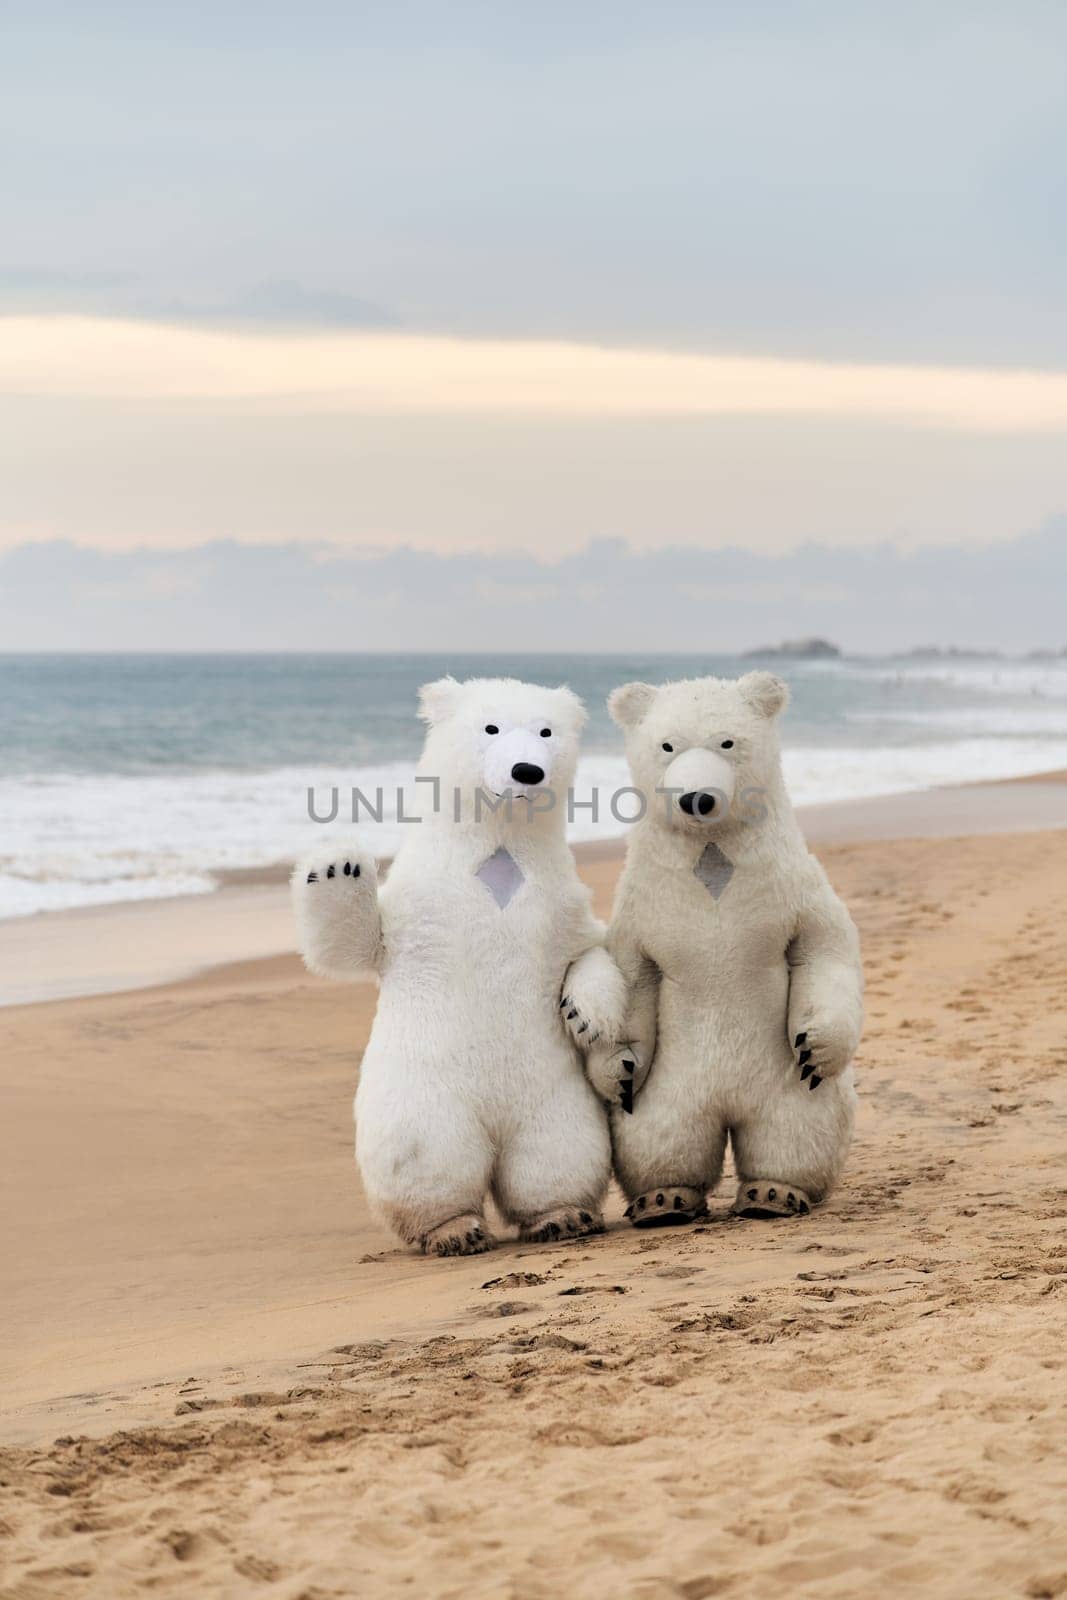 Animators dressed as polar bears entertain people on the beach by driver-s